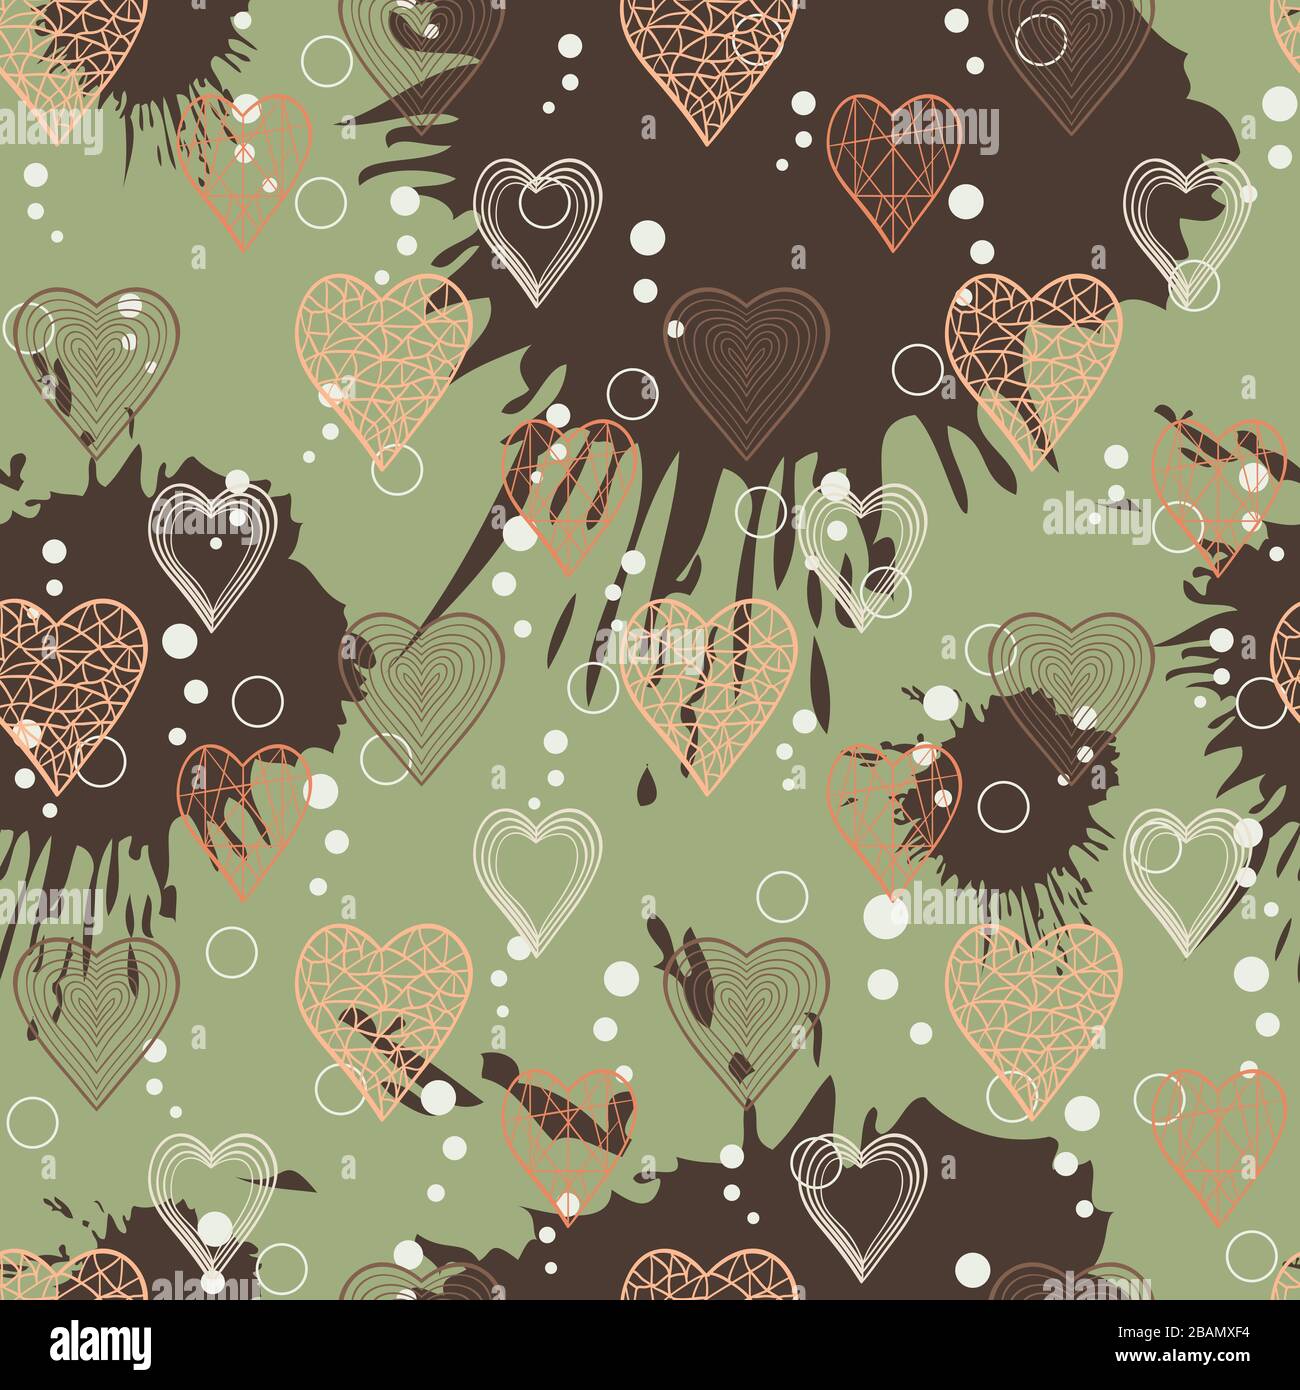 Abstract seamless heart pattern background paper Vector Image